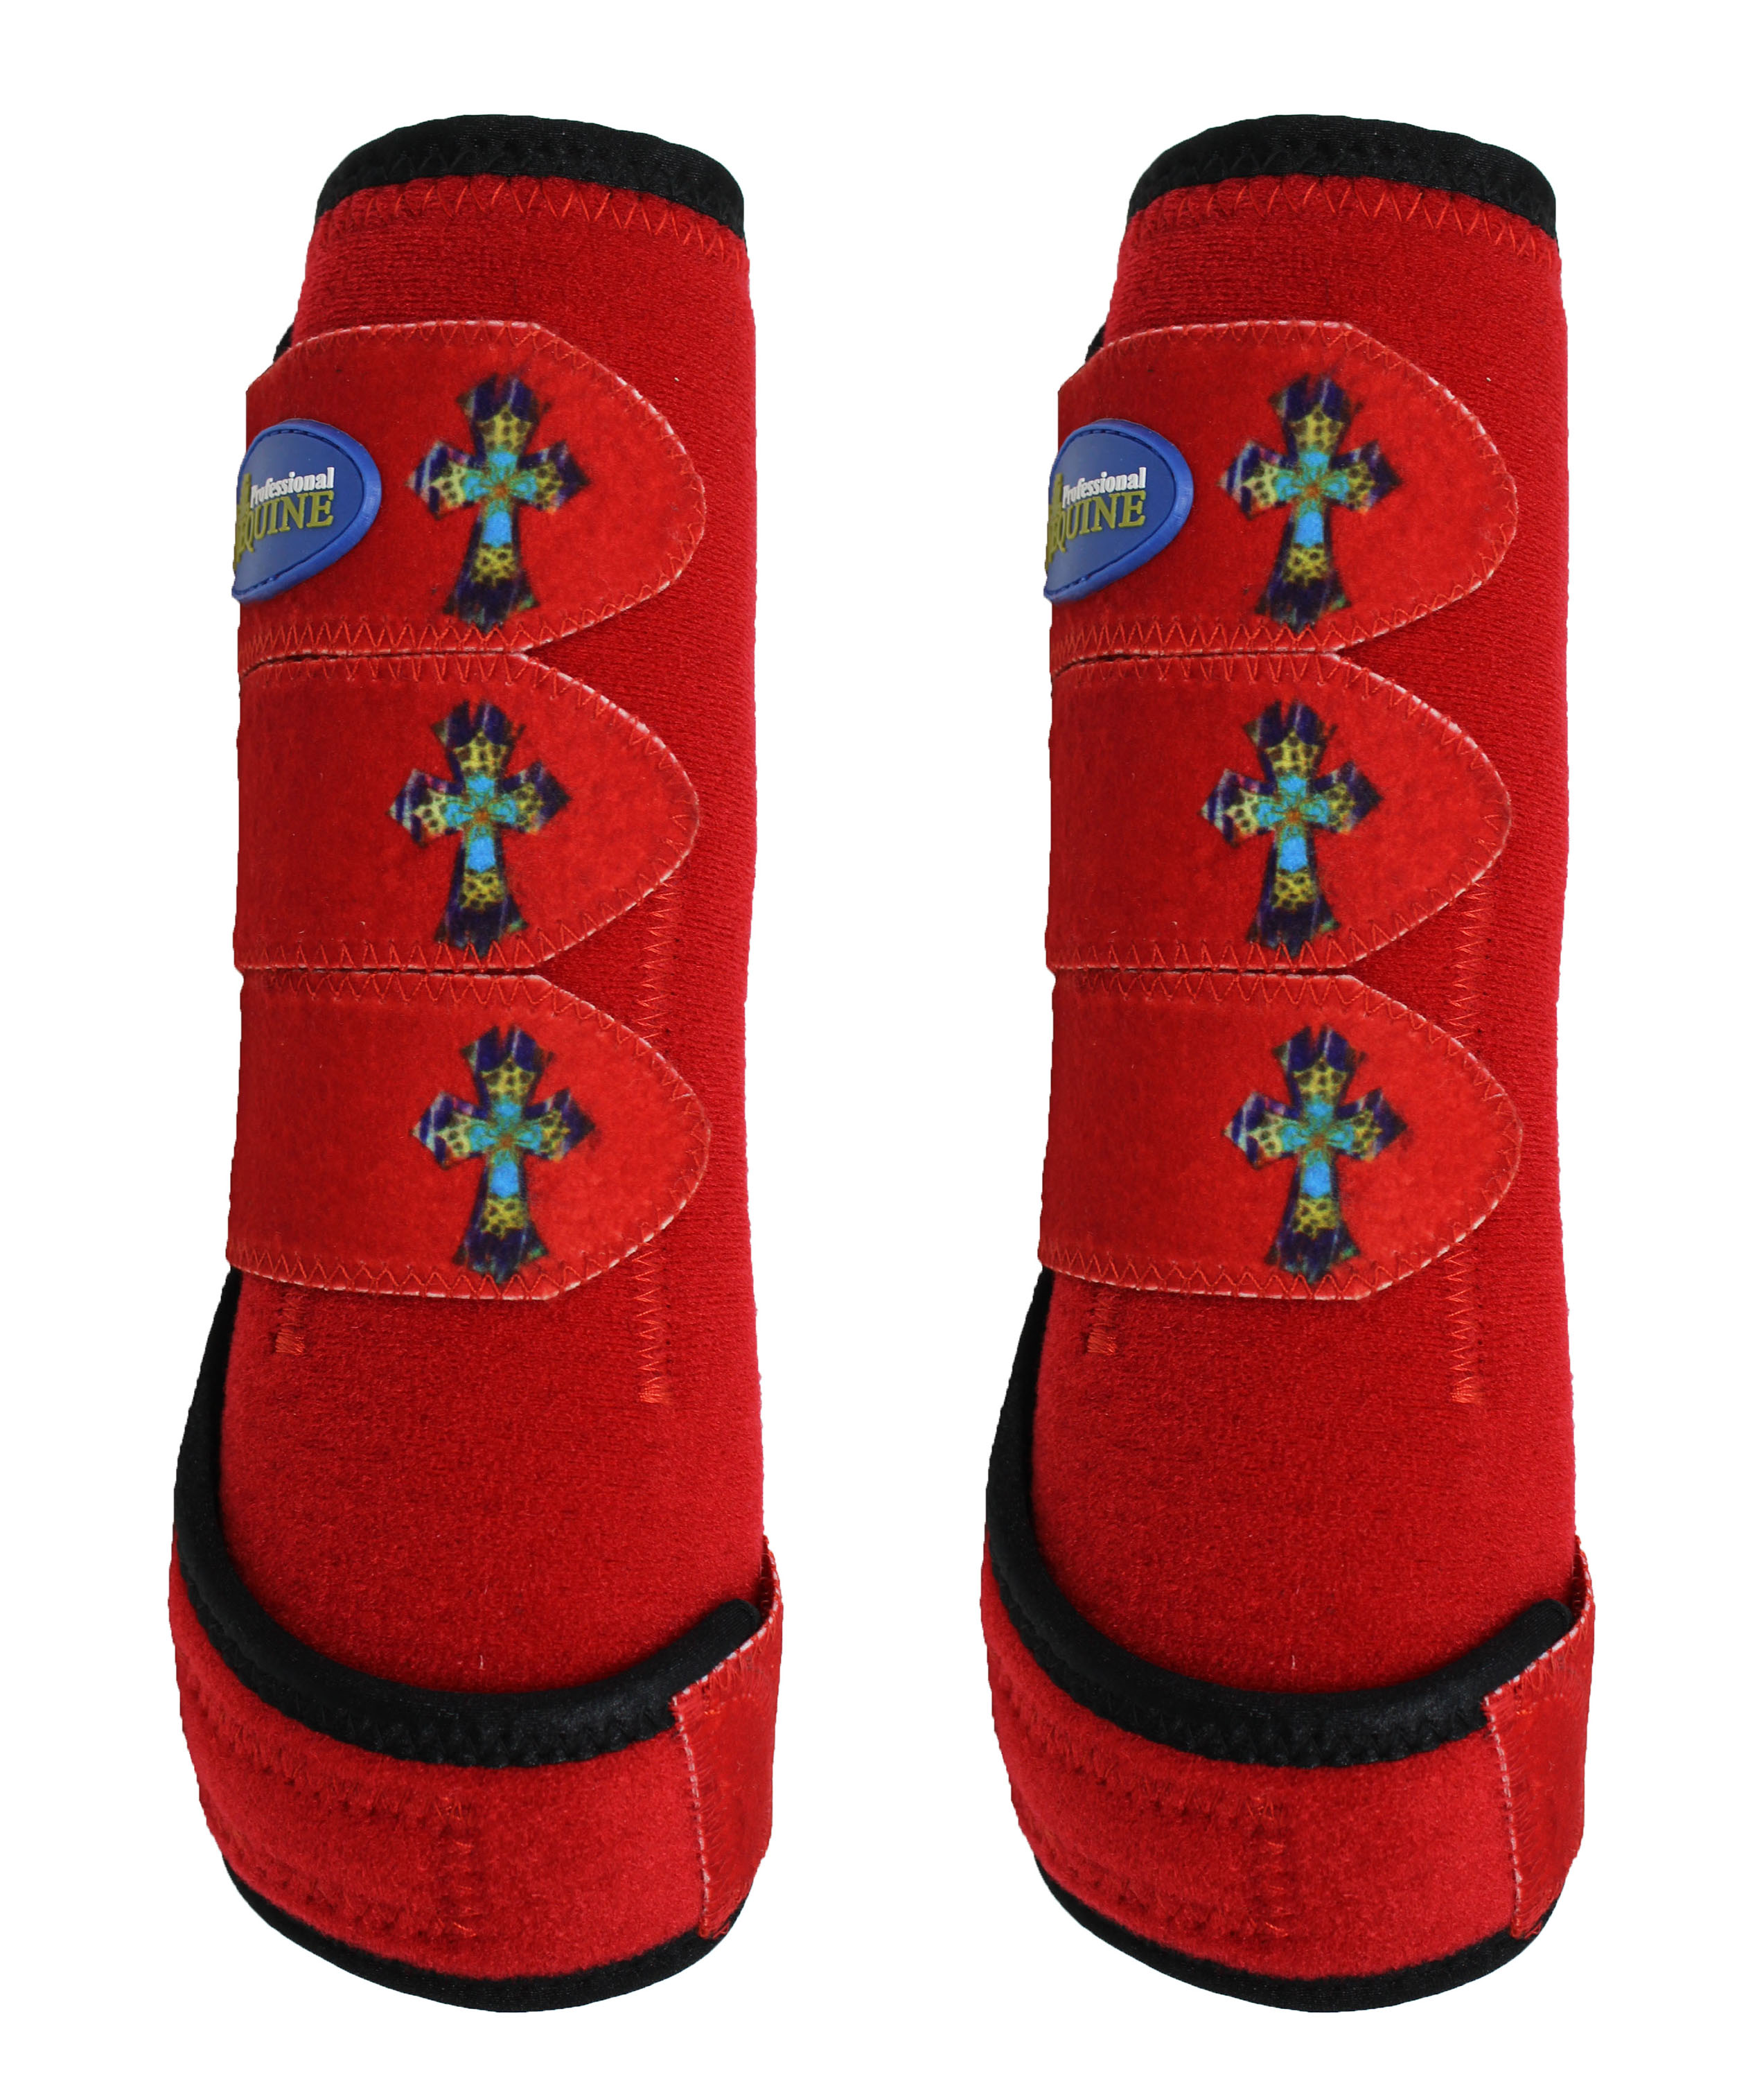 bell boots and splint boots